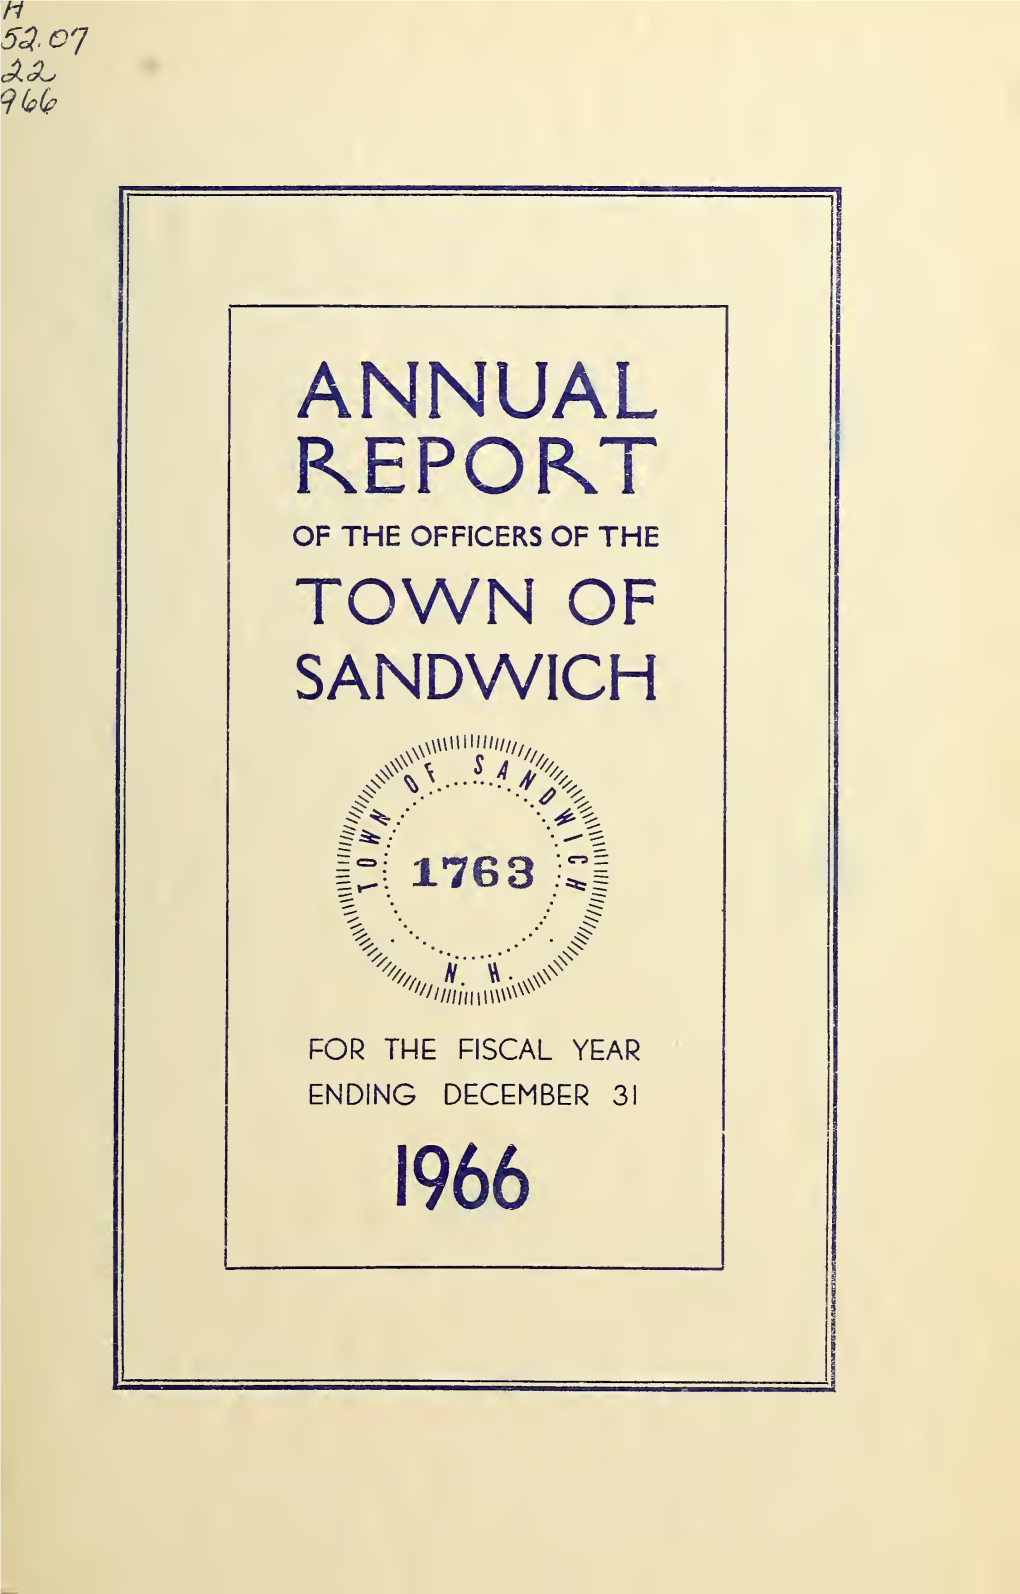 Annual Report of the Officers of the Town of Sandwich, New Hampshire for the Year Ending December 31, 1966